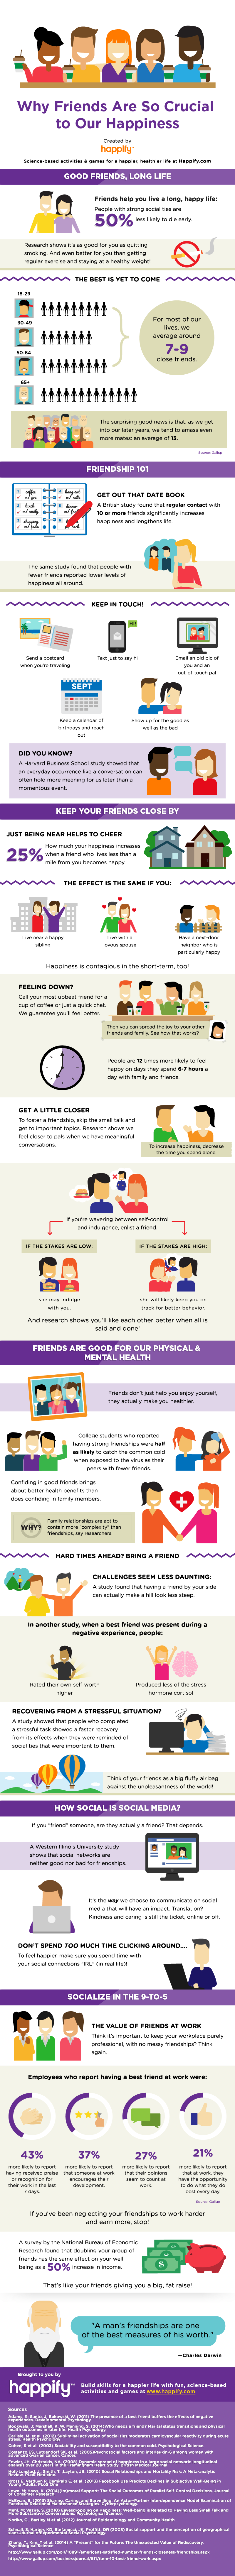 Why friends are so crucial to happiness (infographic)